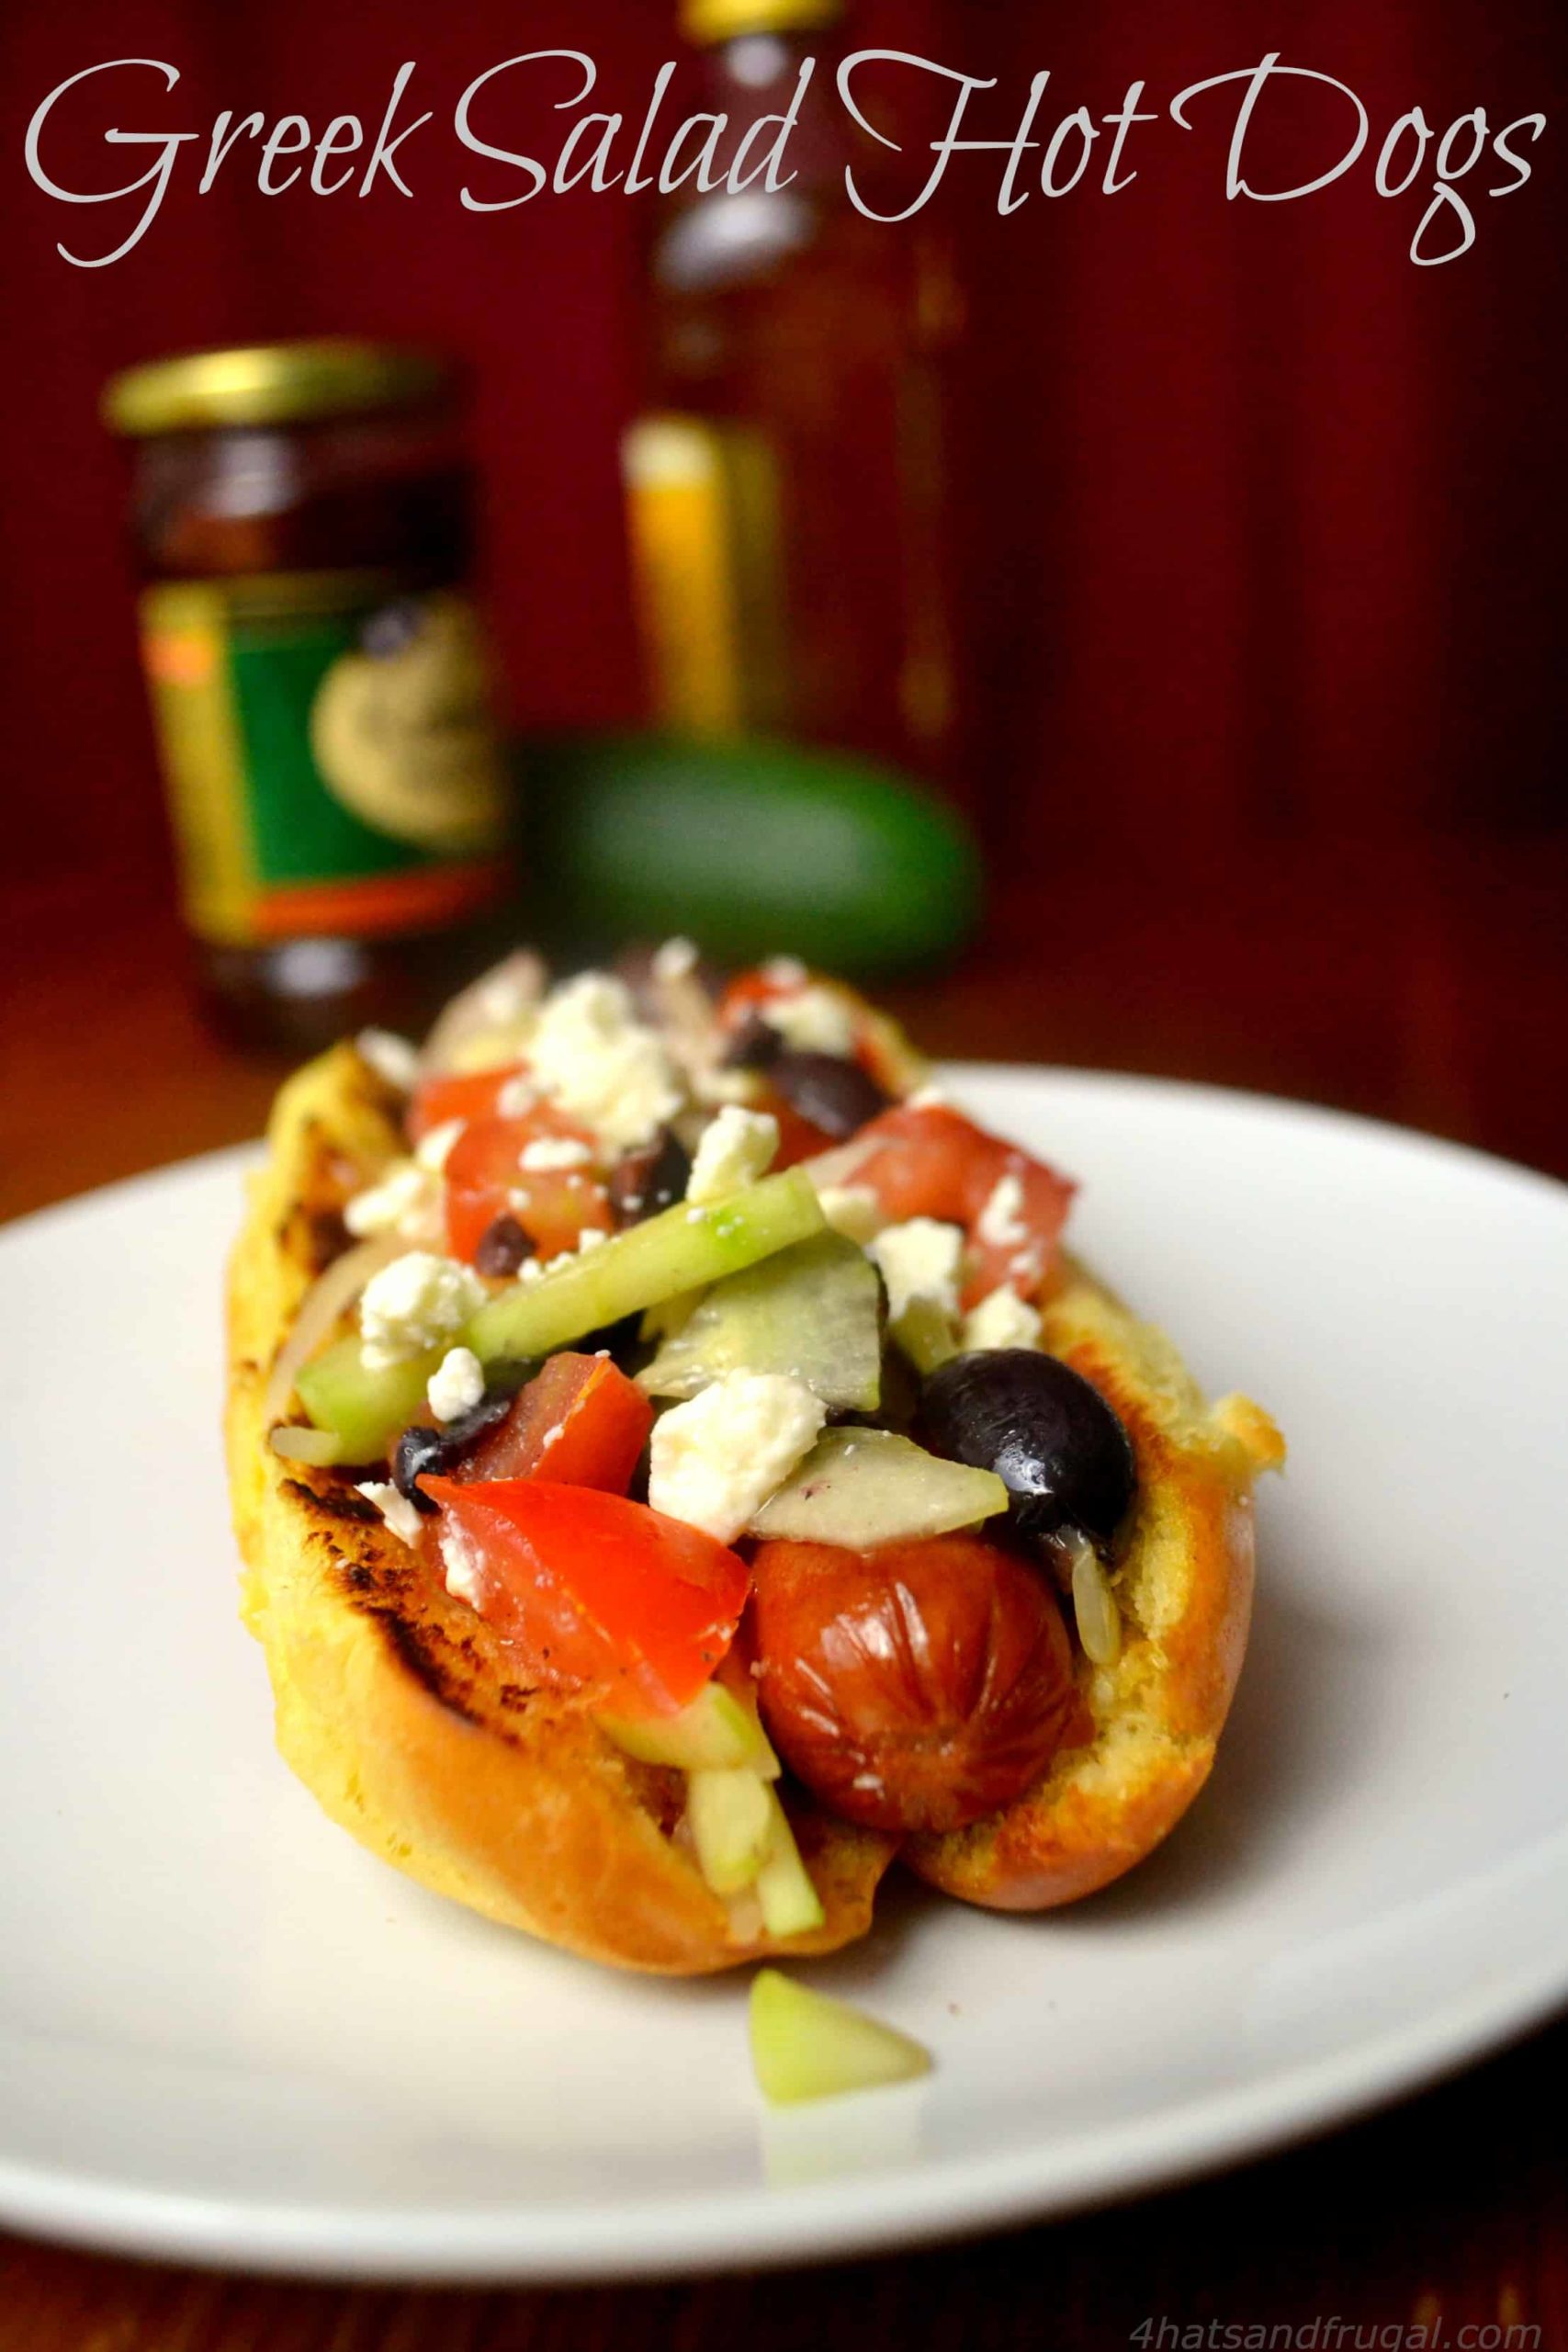 If you are a fan of Greek salad, you have to try these Greek Salad hot dogs! Easy recipe and bold flavors.